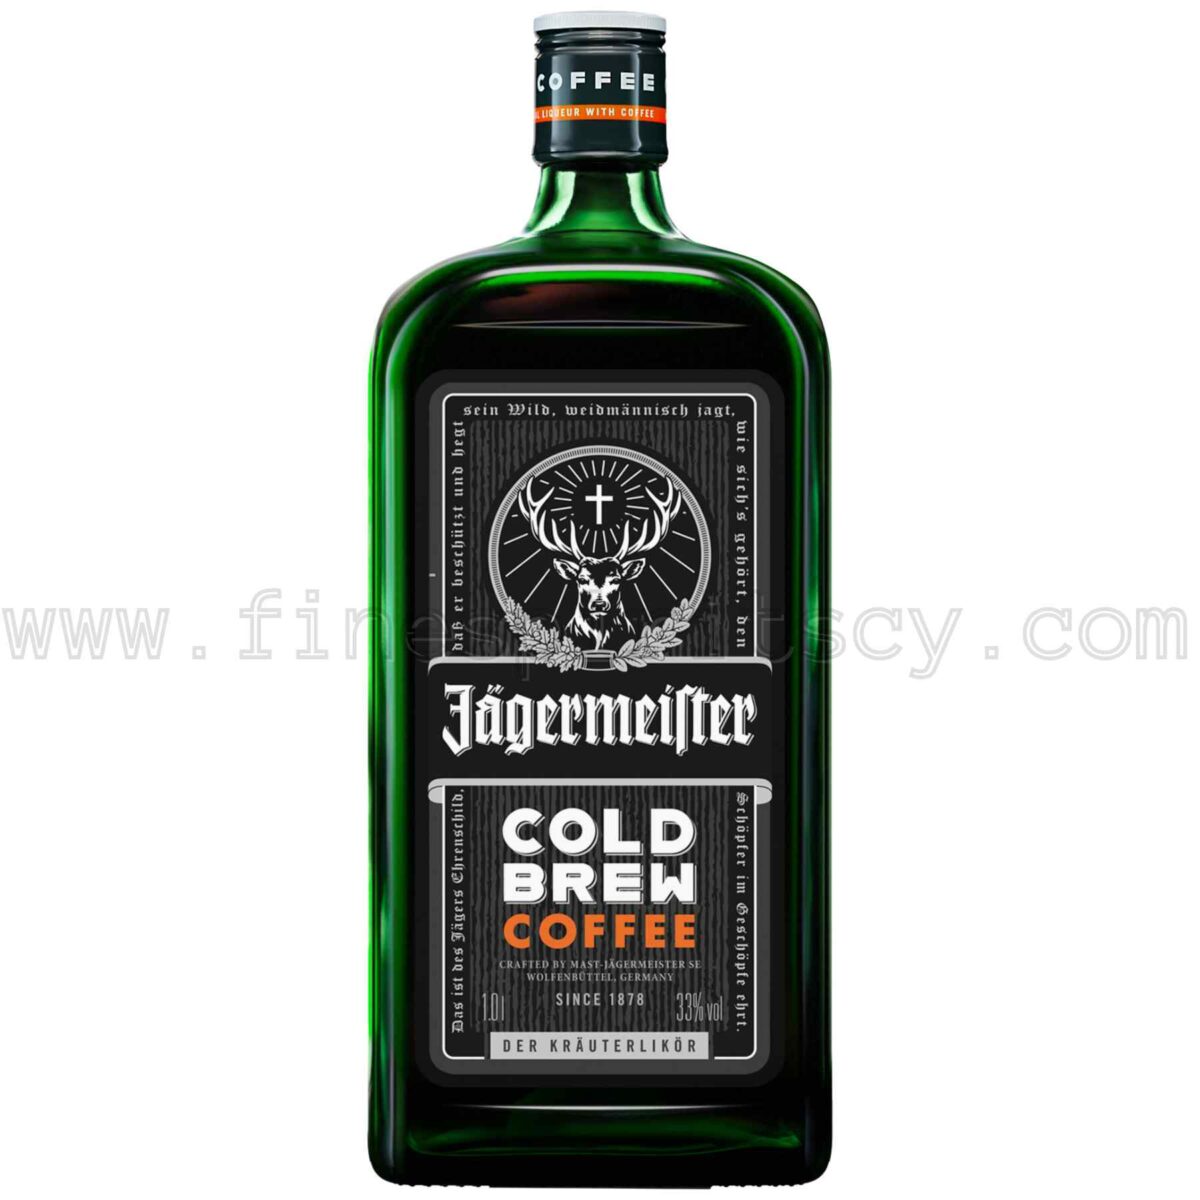 Jagermeister Cold Brew Coffee Liqueur Price Cyprus